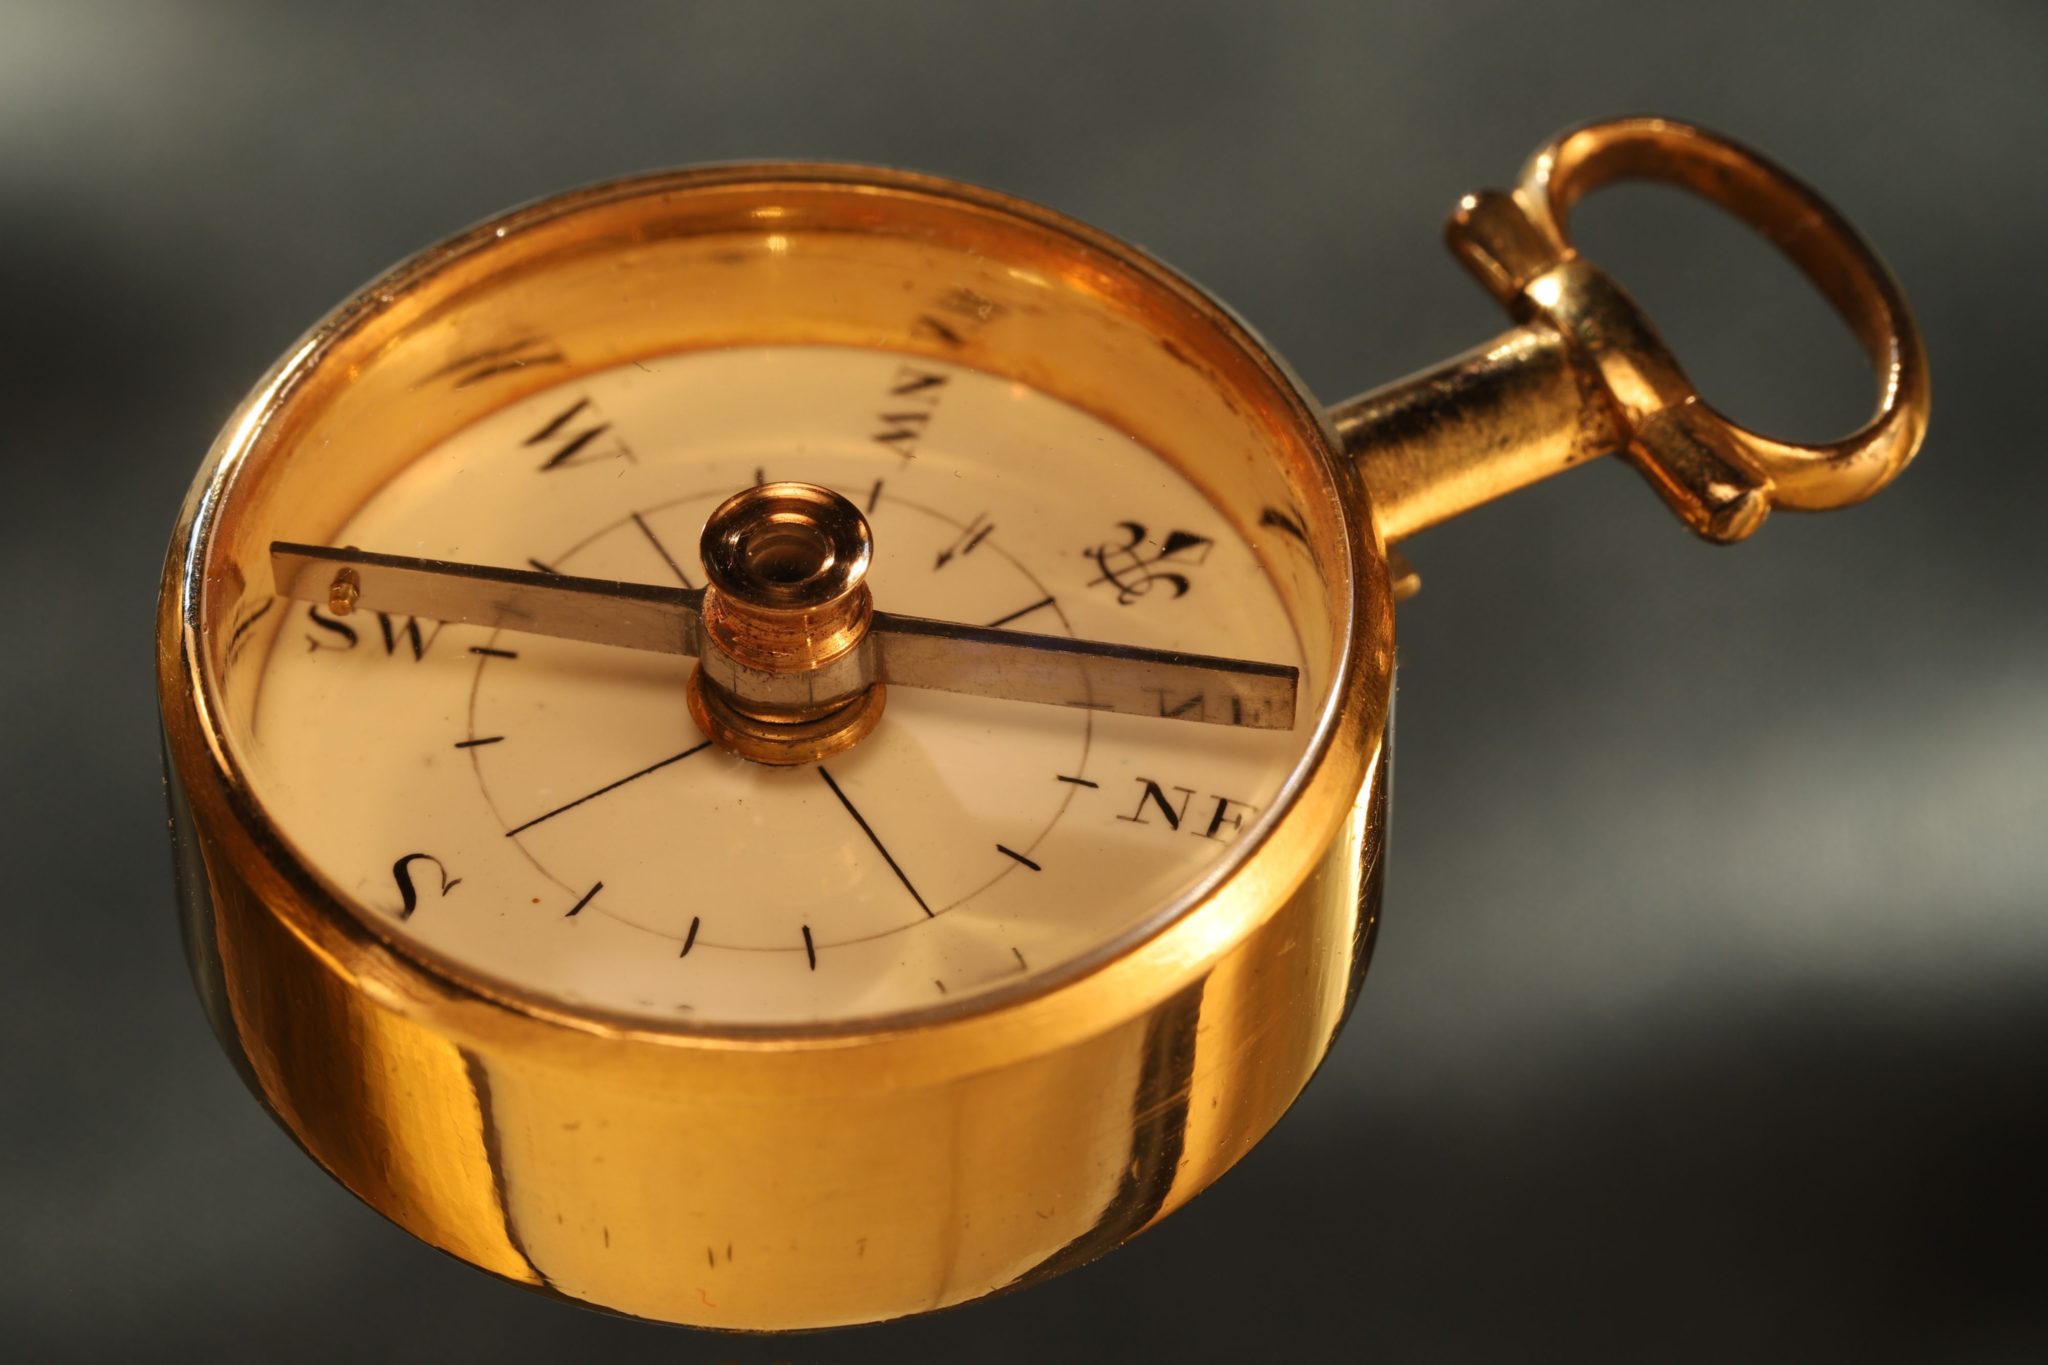 Image of Miniature Long Necked Gilt Brass Compass in Case c1800